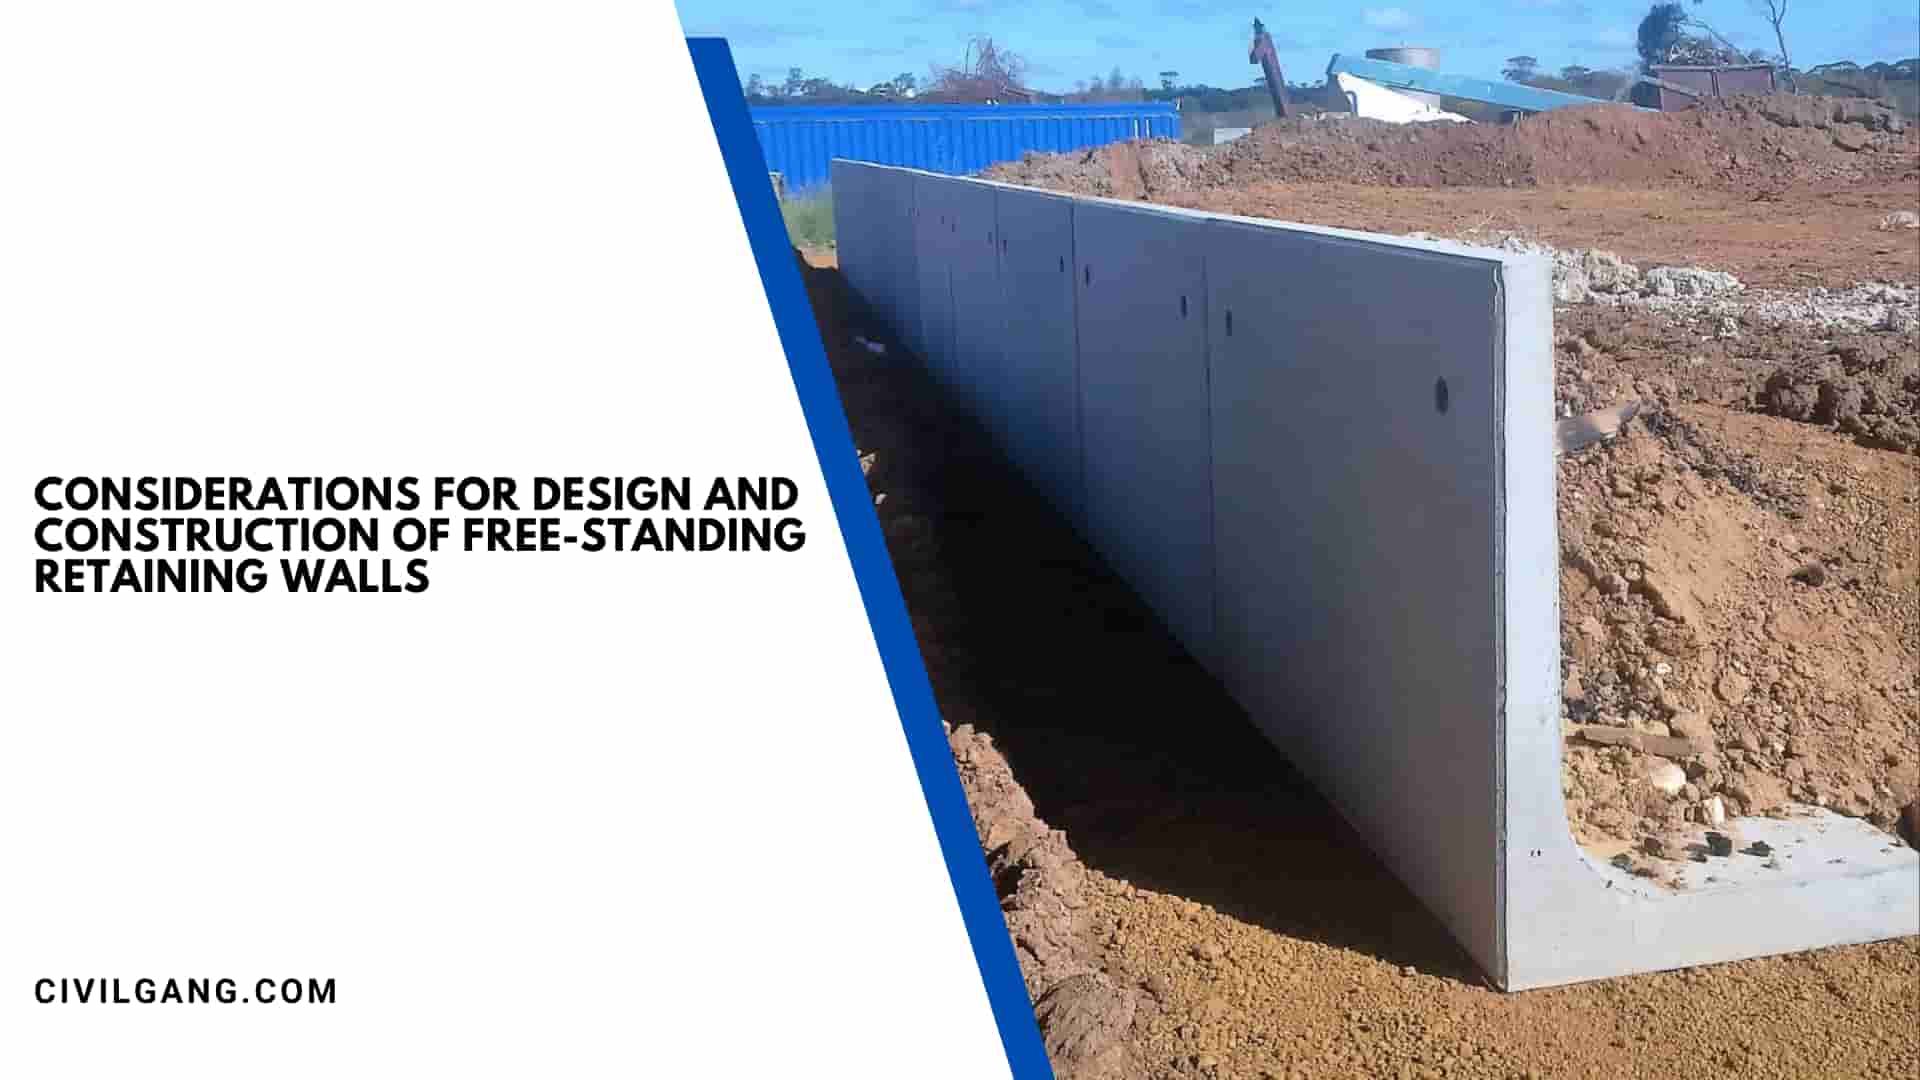 Considerations for Design and Construction of Free-Standing Retaining Walls